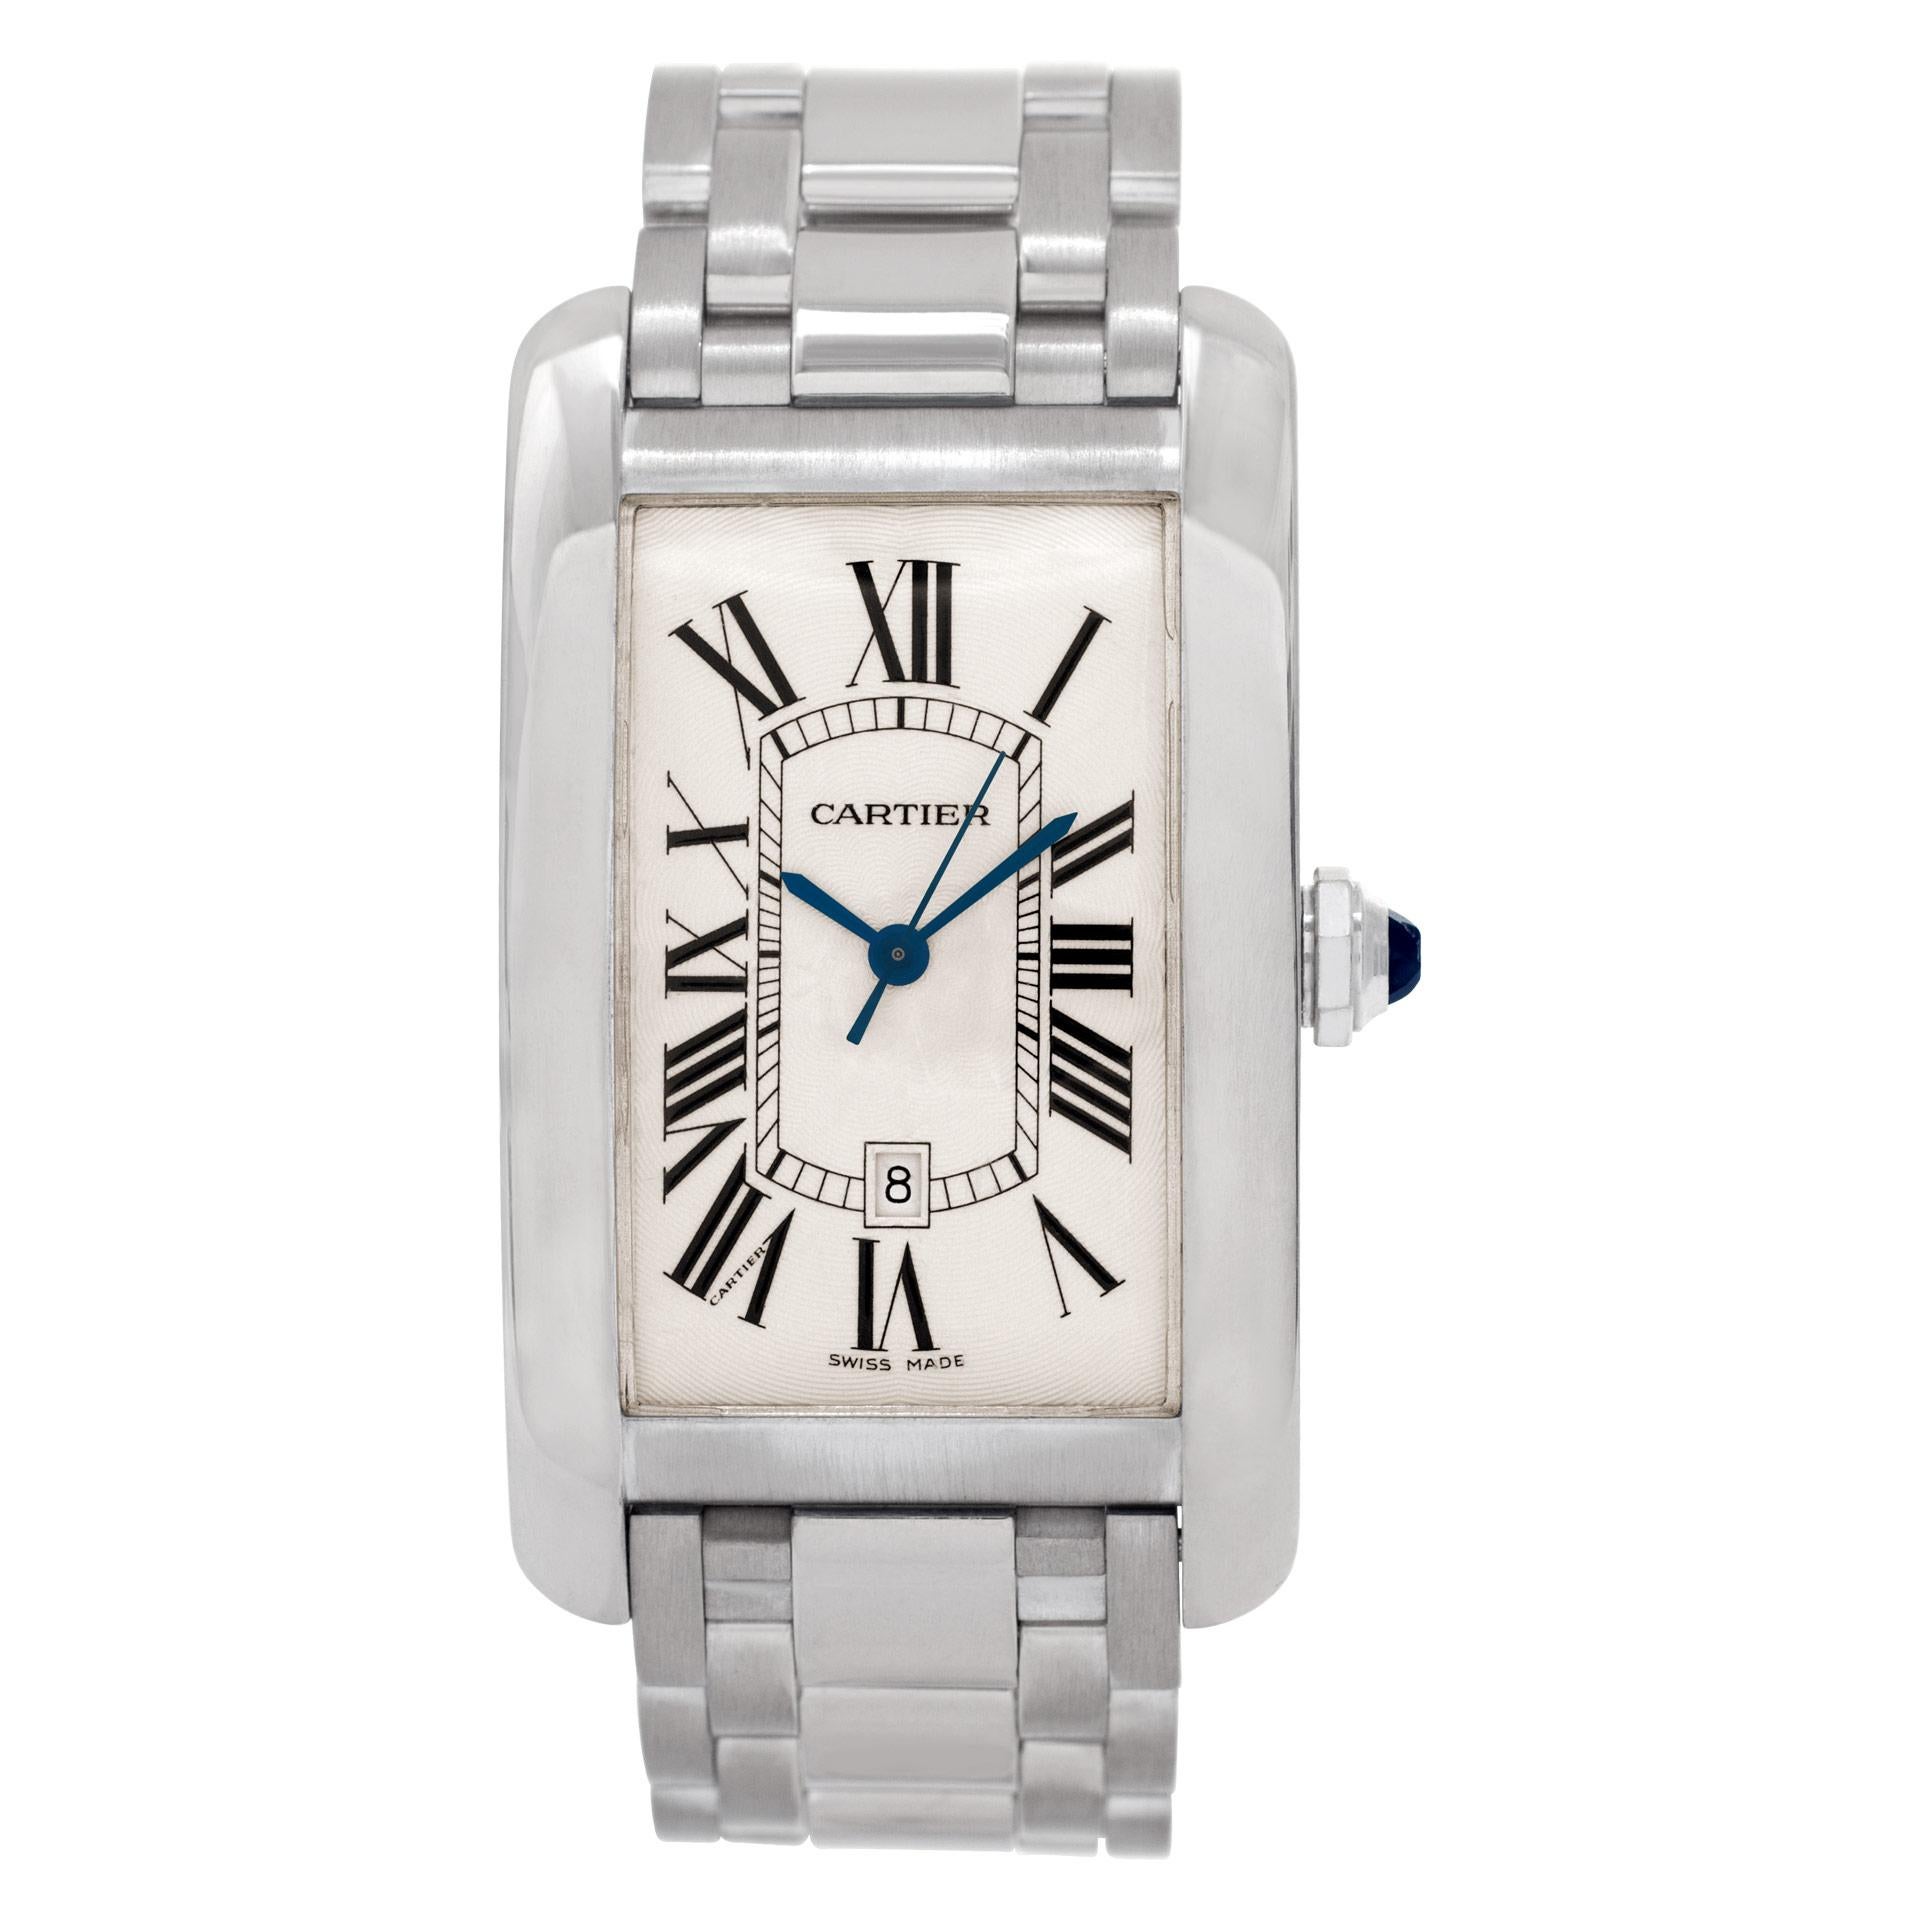 Cartier Tank Americaine XL Watch in 18k White Gold with White Dial